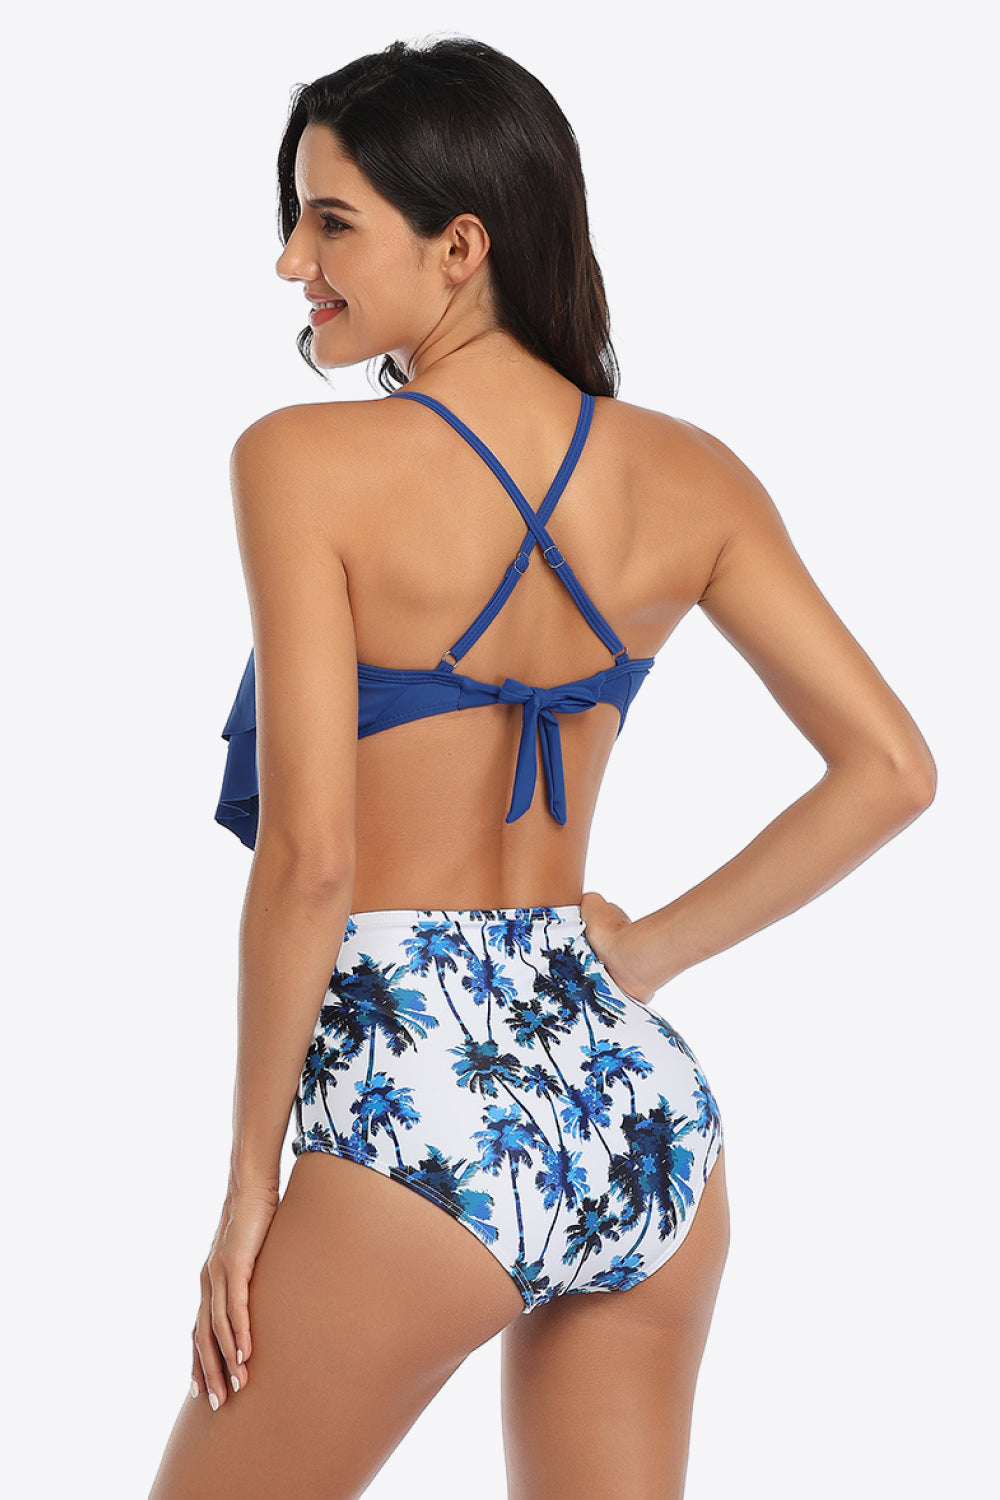 Botanical Print Ruffled Two-Piece Swimsuit - Dash Trend